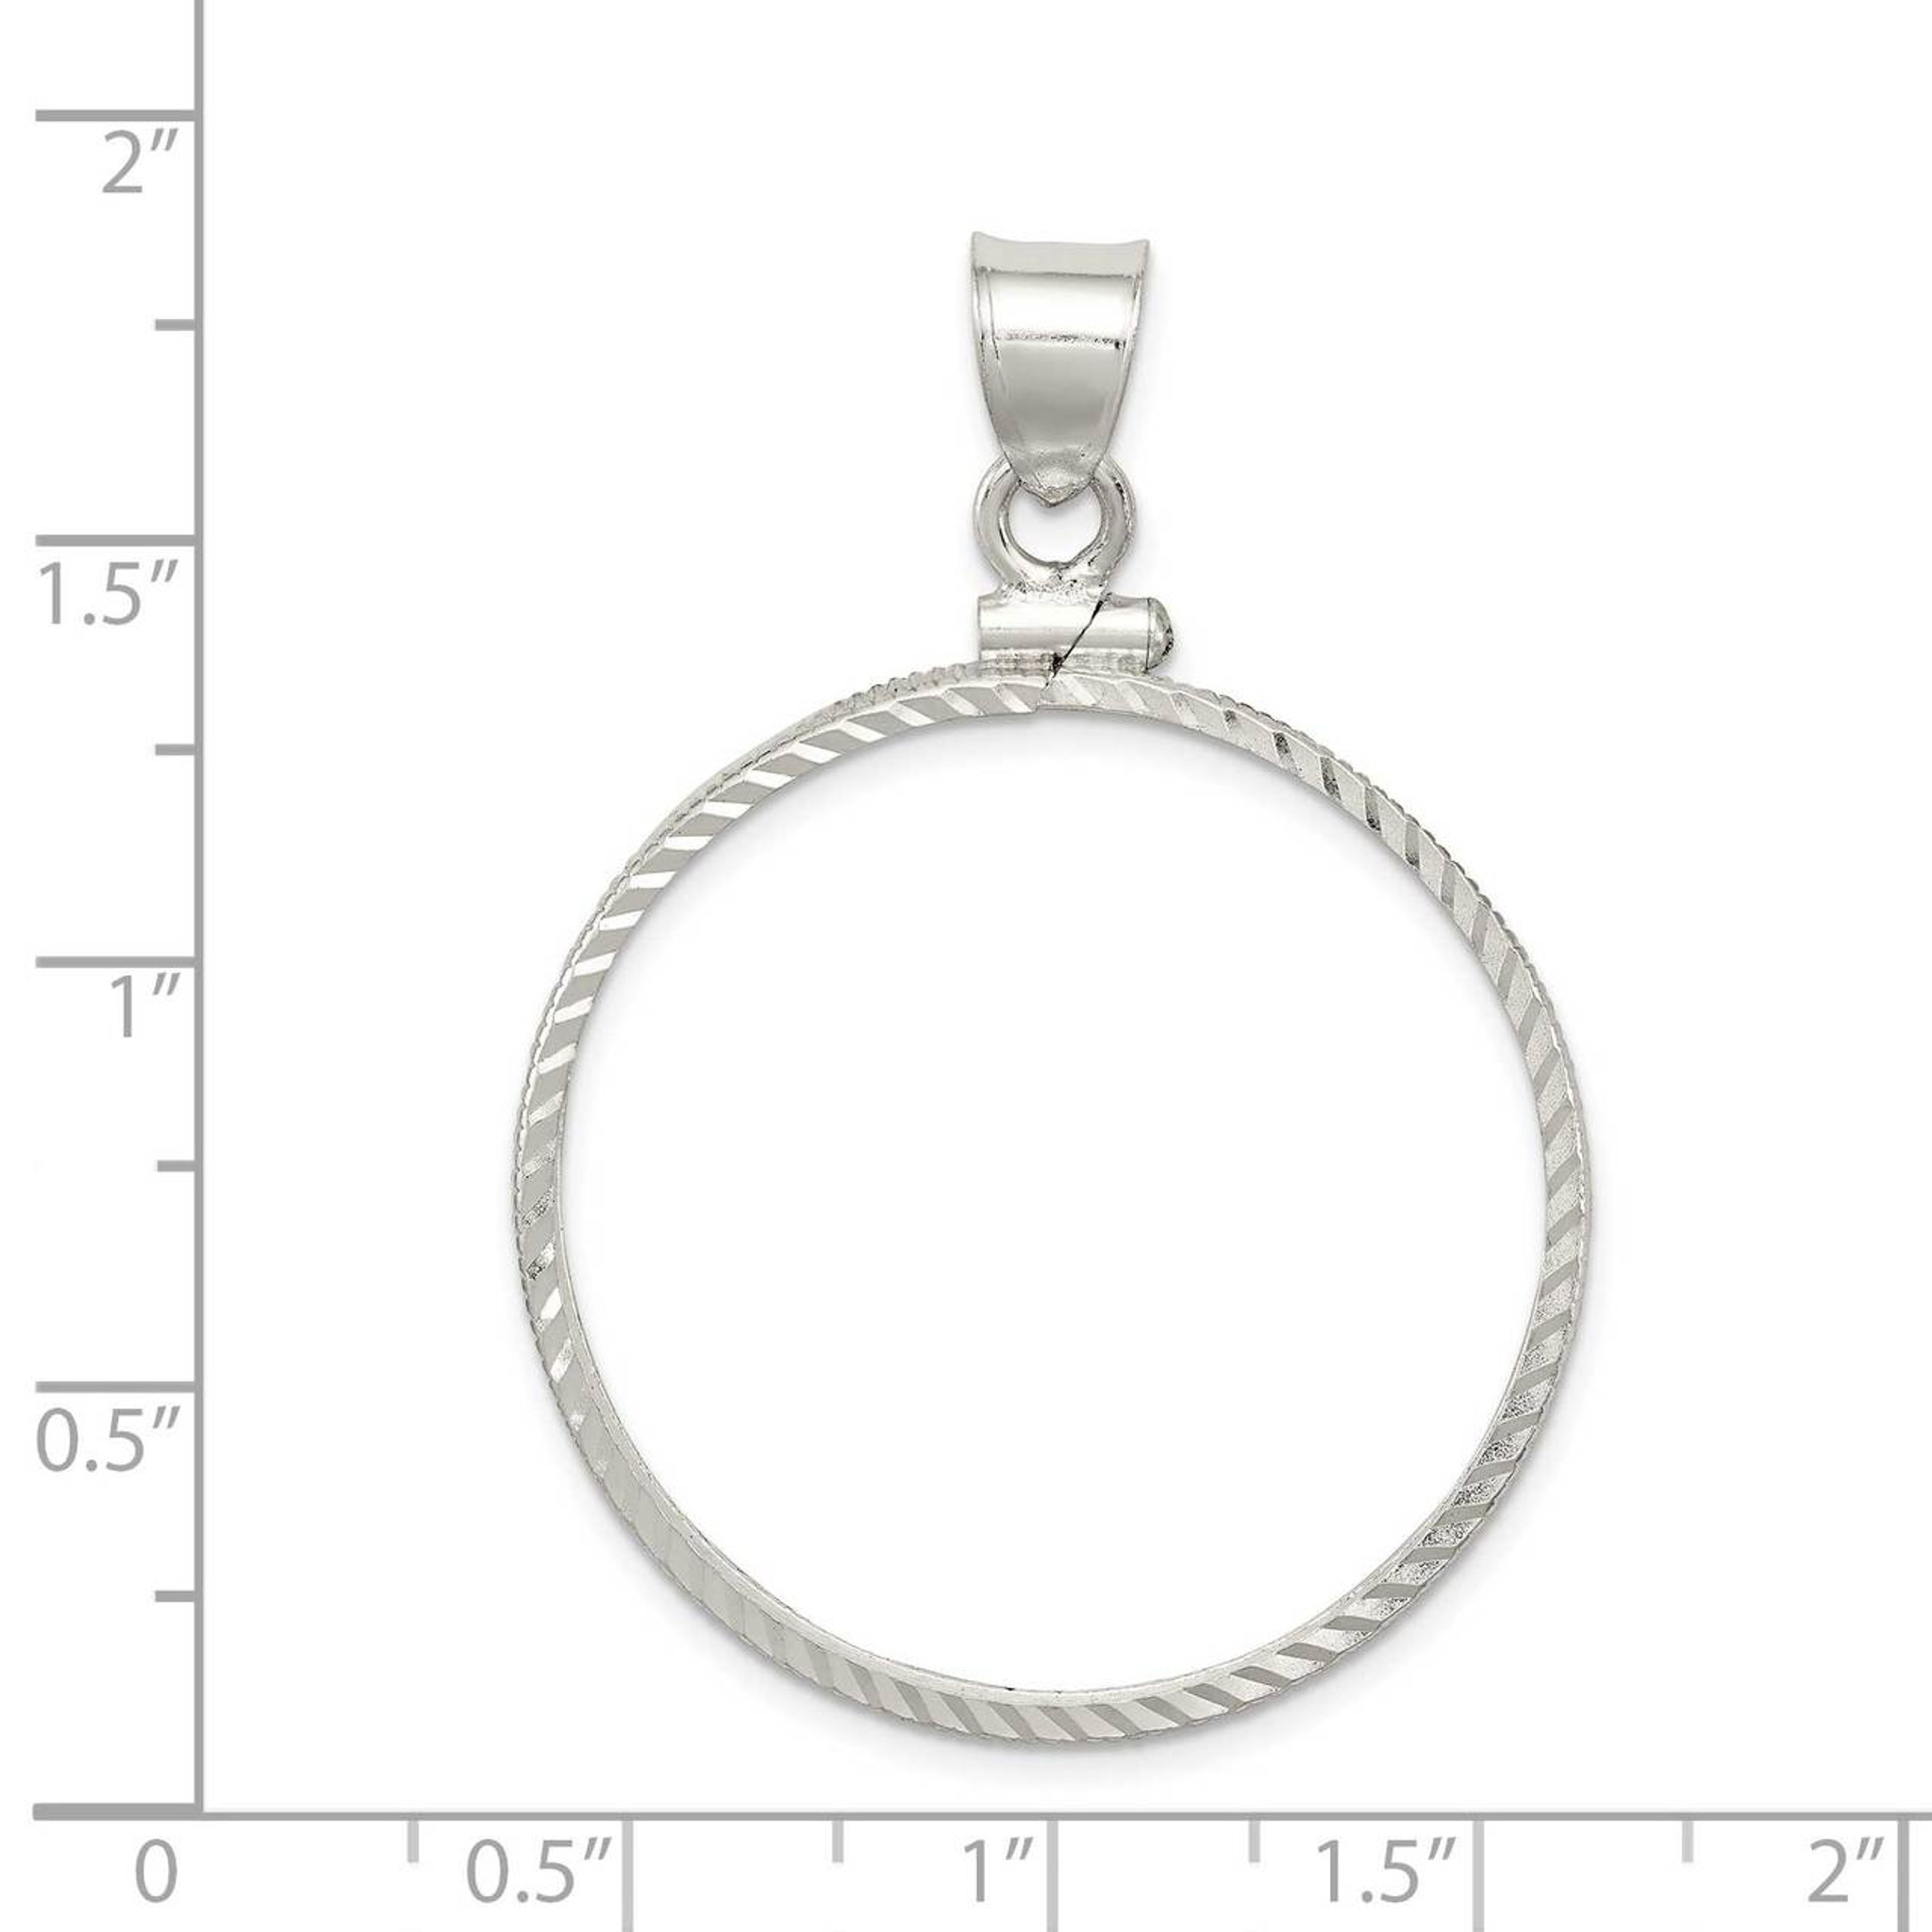 Solid 925 Sterling Silver 30.5 x 2.1mm $0.50 Plain Coin Bezel Pendant